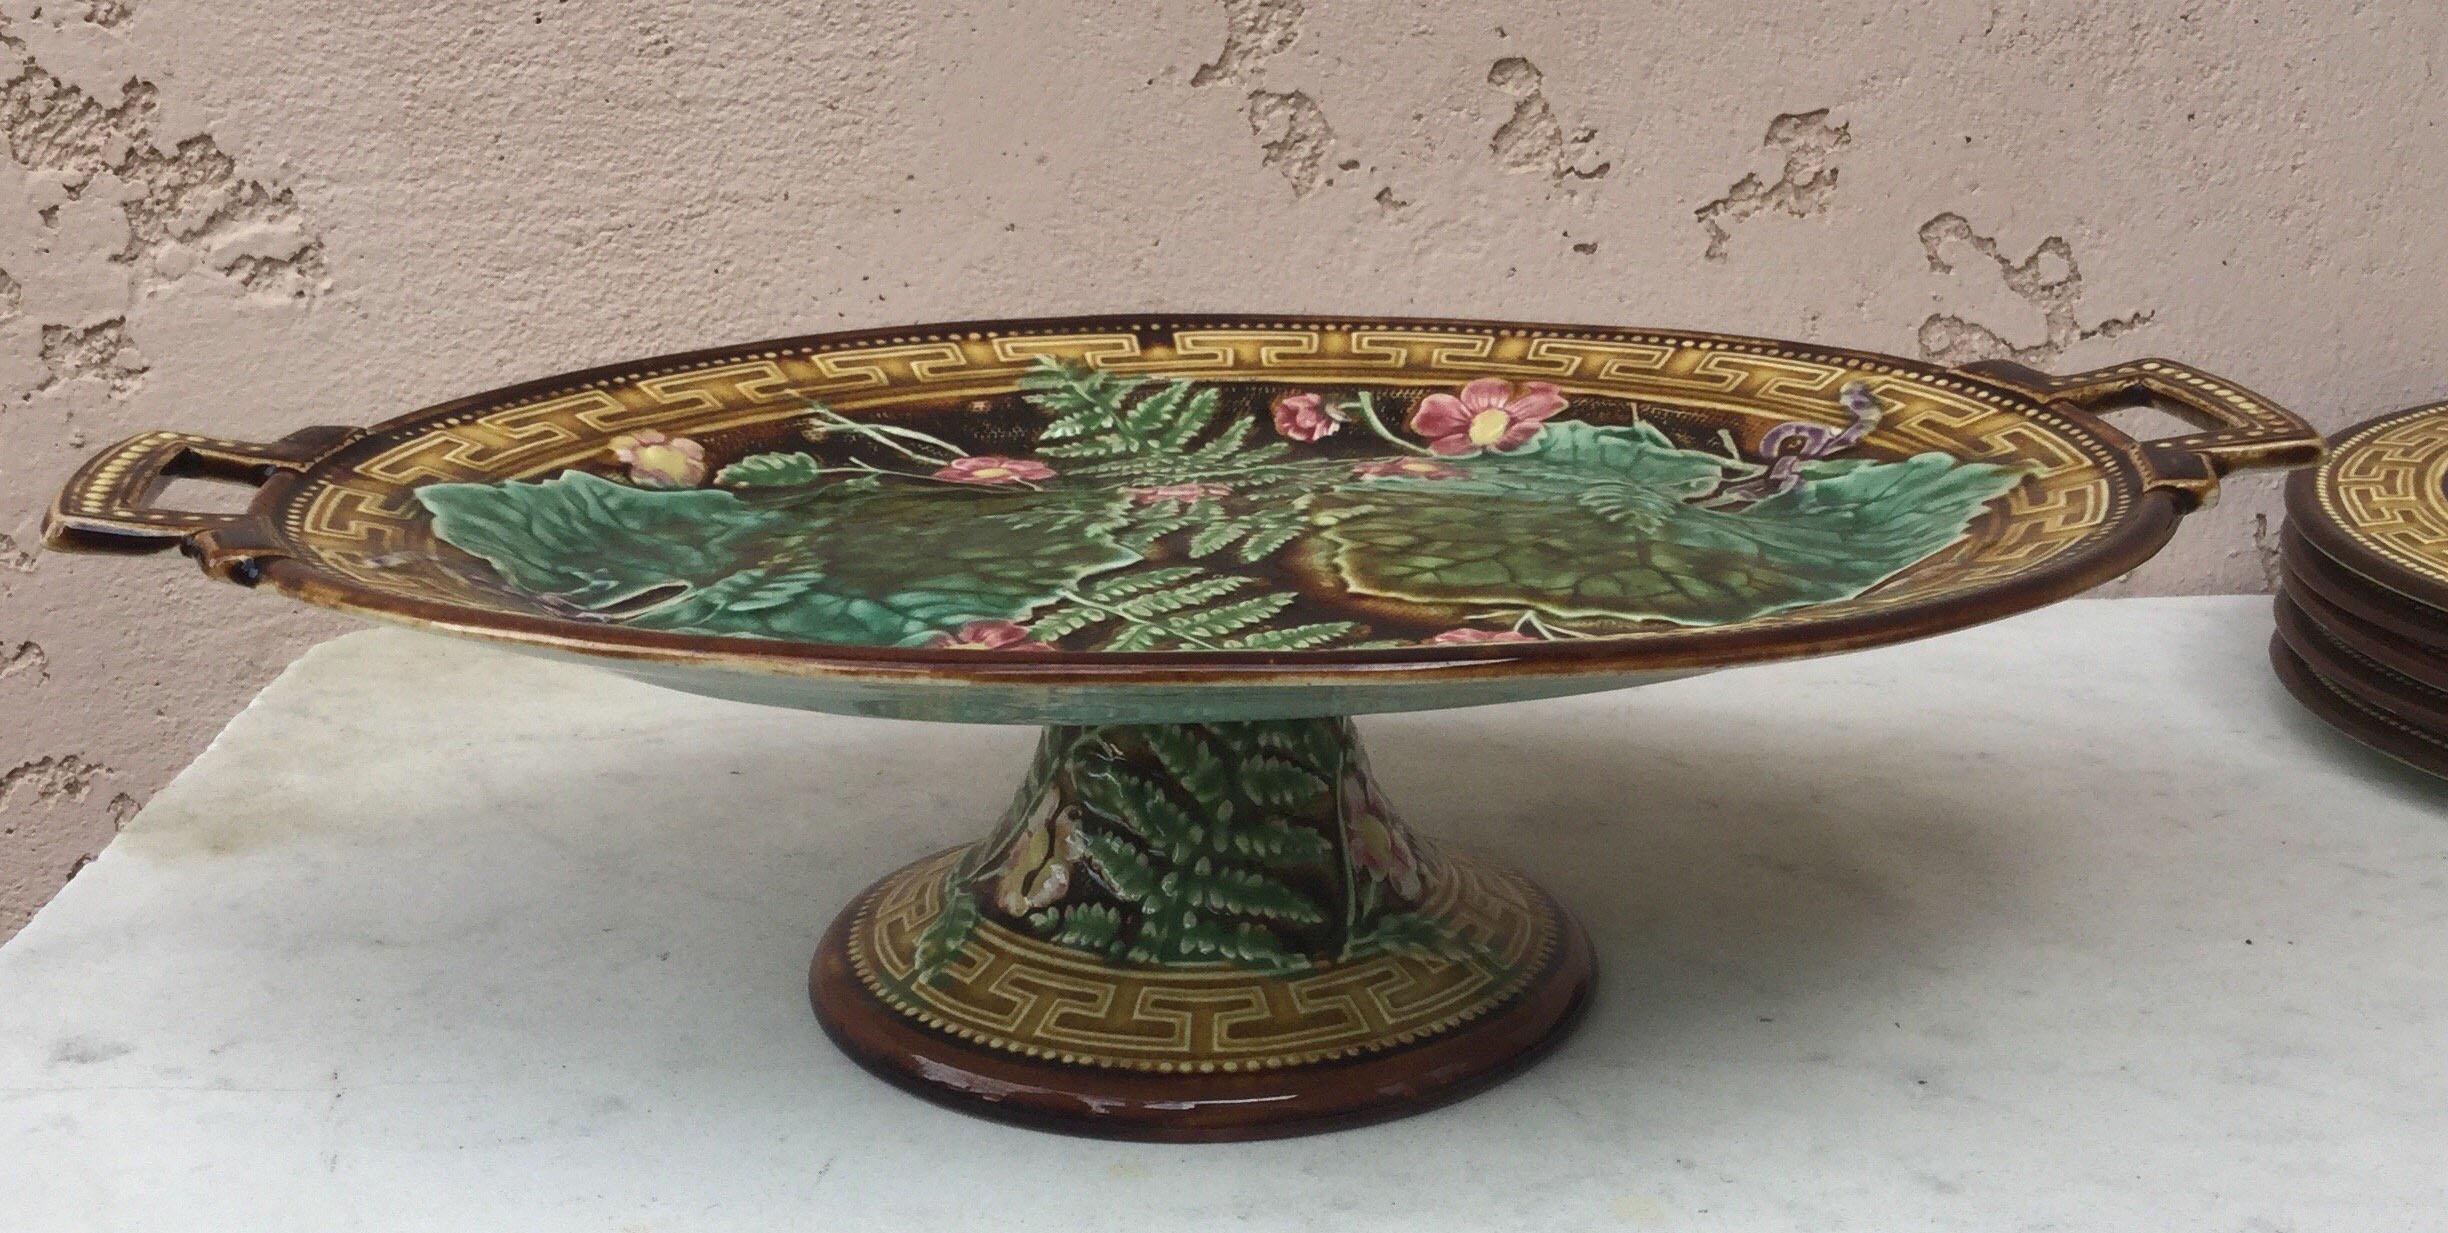 French oval Majolica cake stand or comport with leaves, ferns, and pink flowers, circa 1880-1890, signed Choisy le Roi.